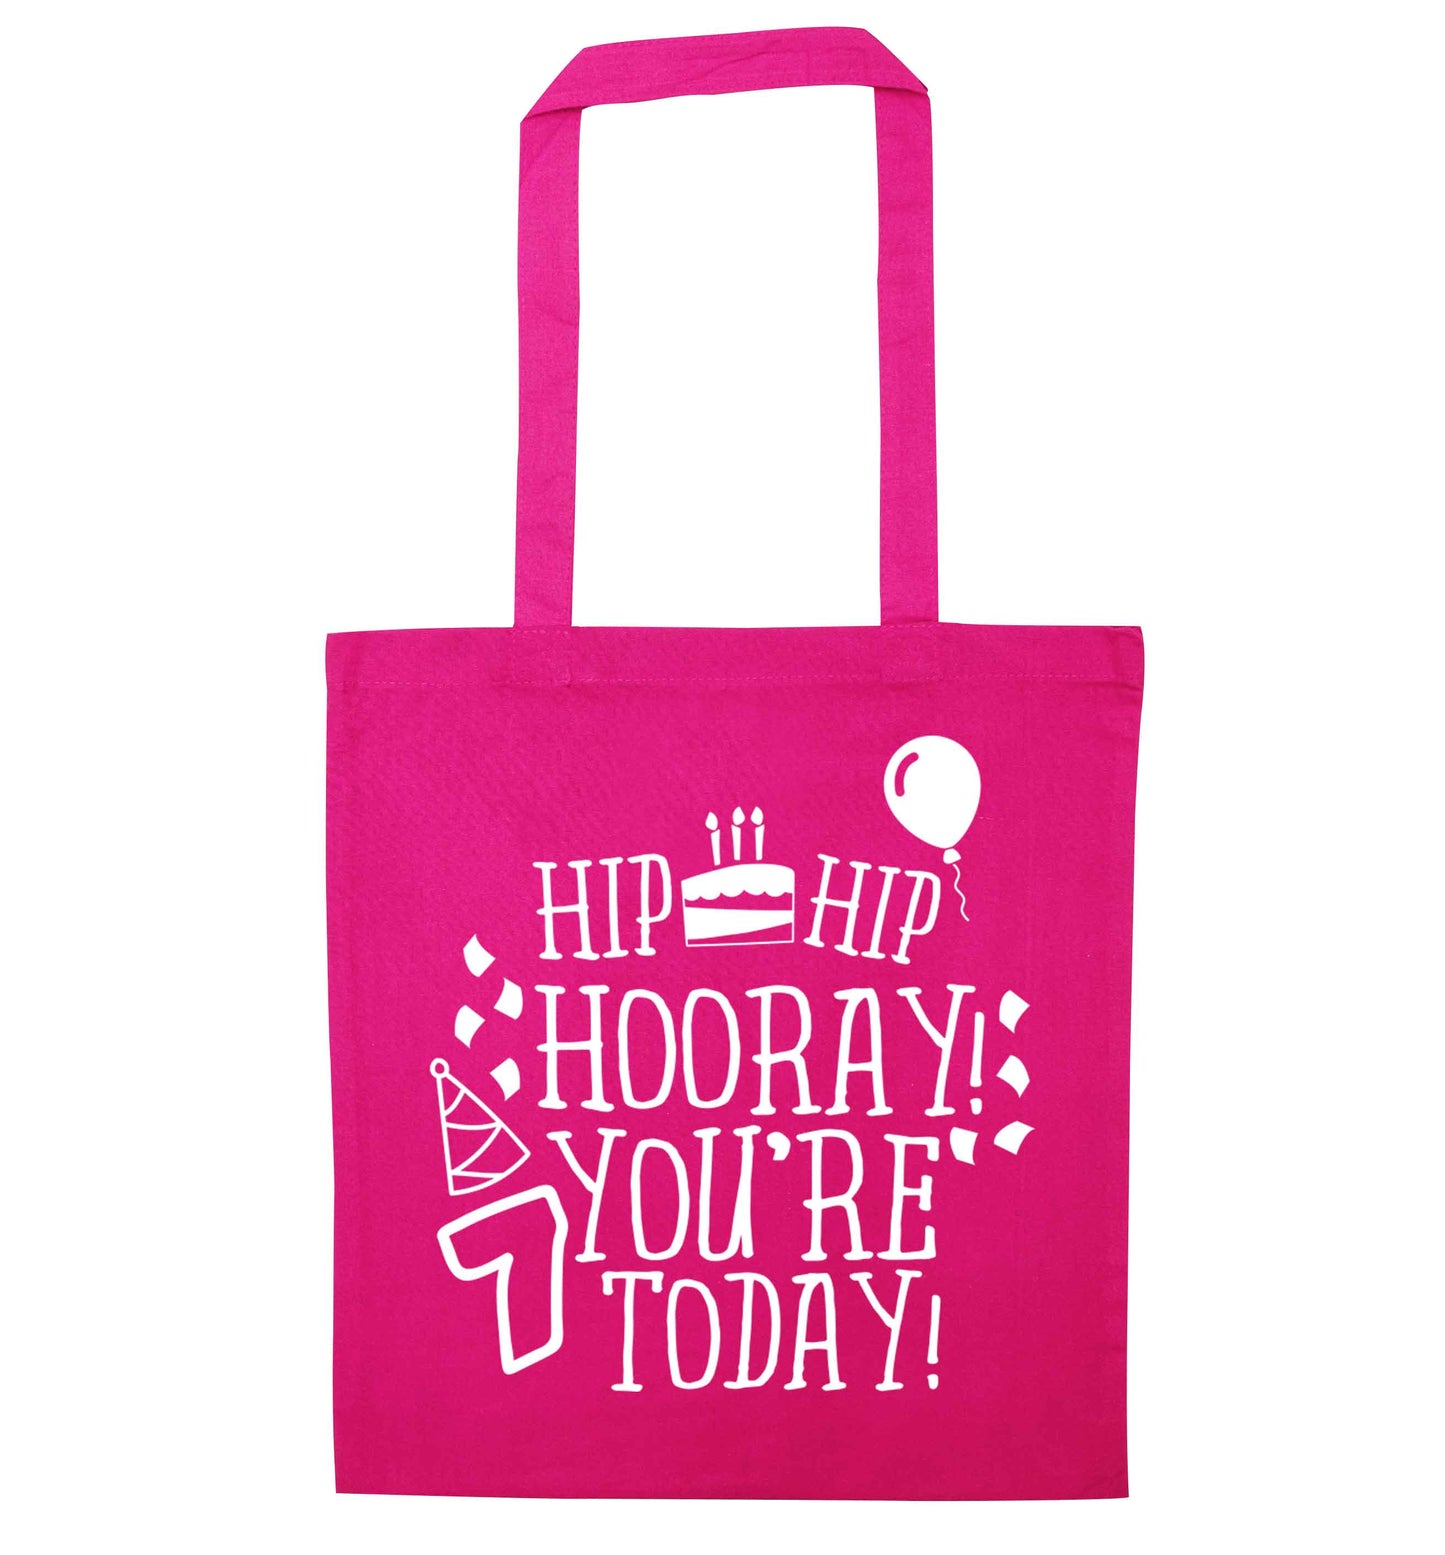 Hip hip hooray you're seven today! pink tote bag